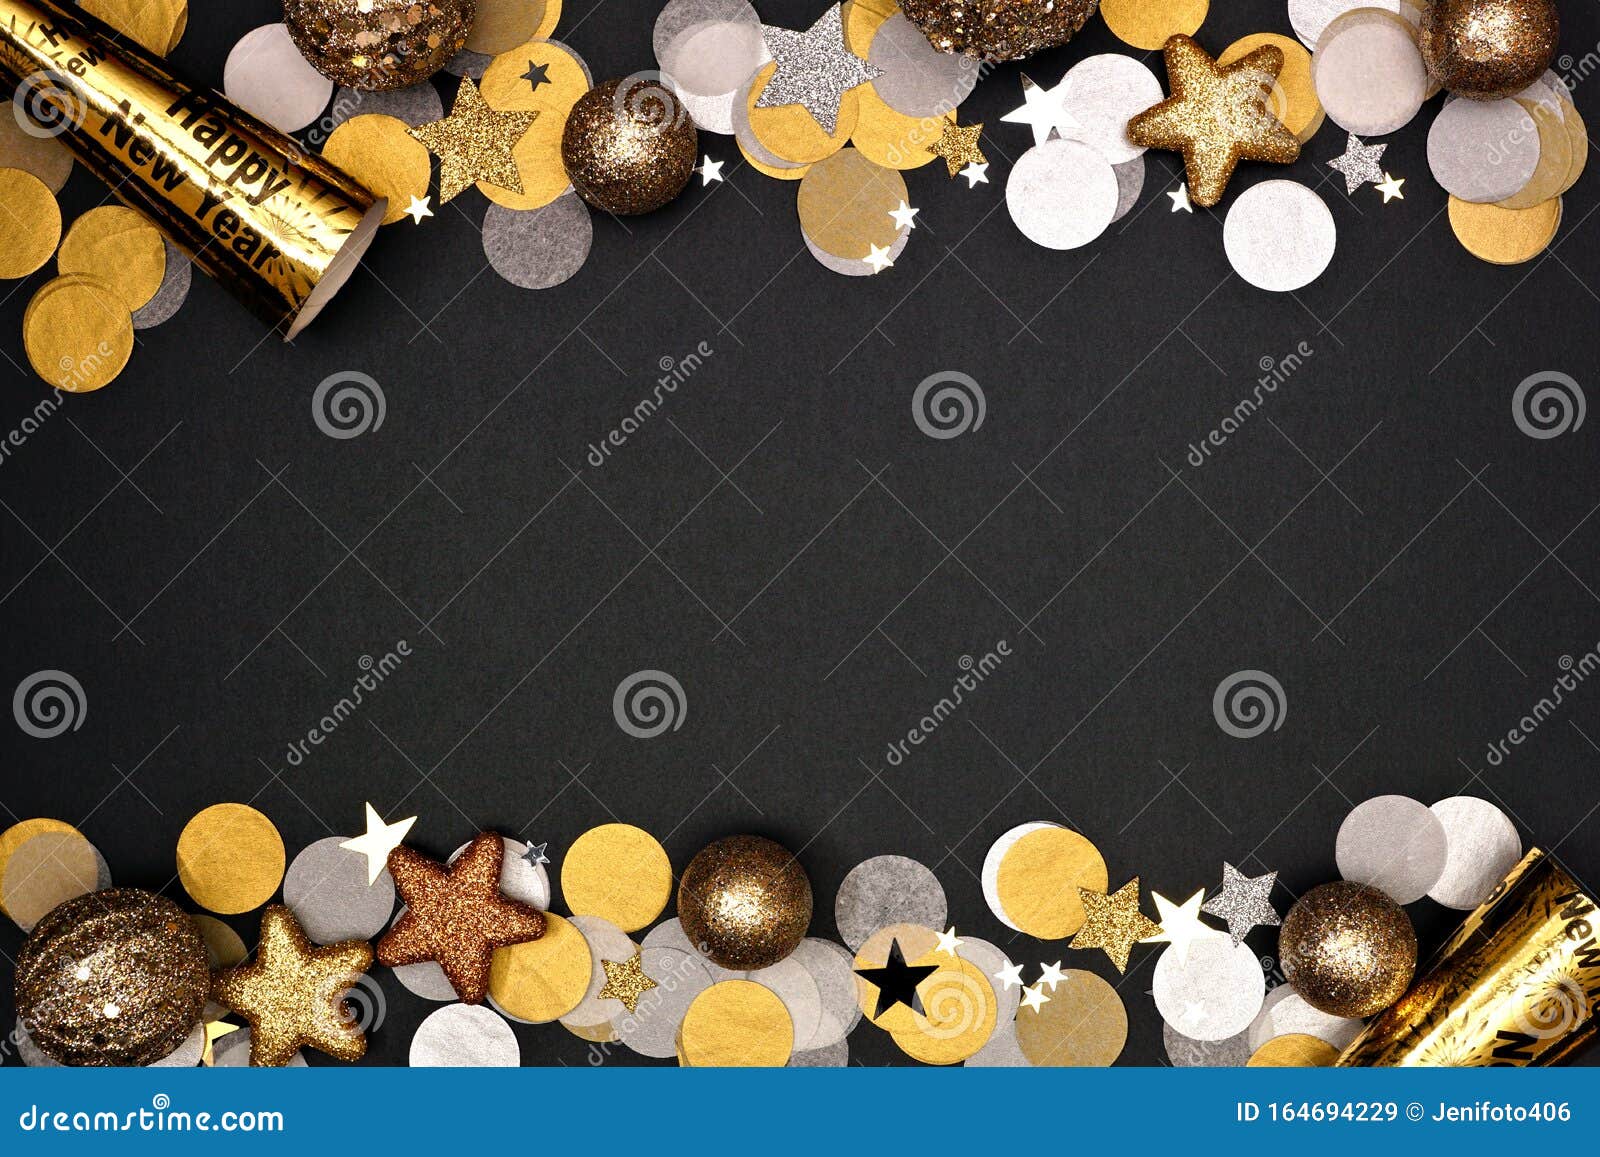 new years eve double border of confetti, decorations and noisemakers, top view over a black background